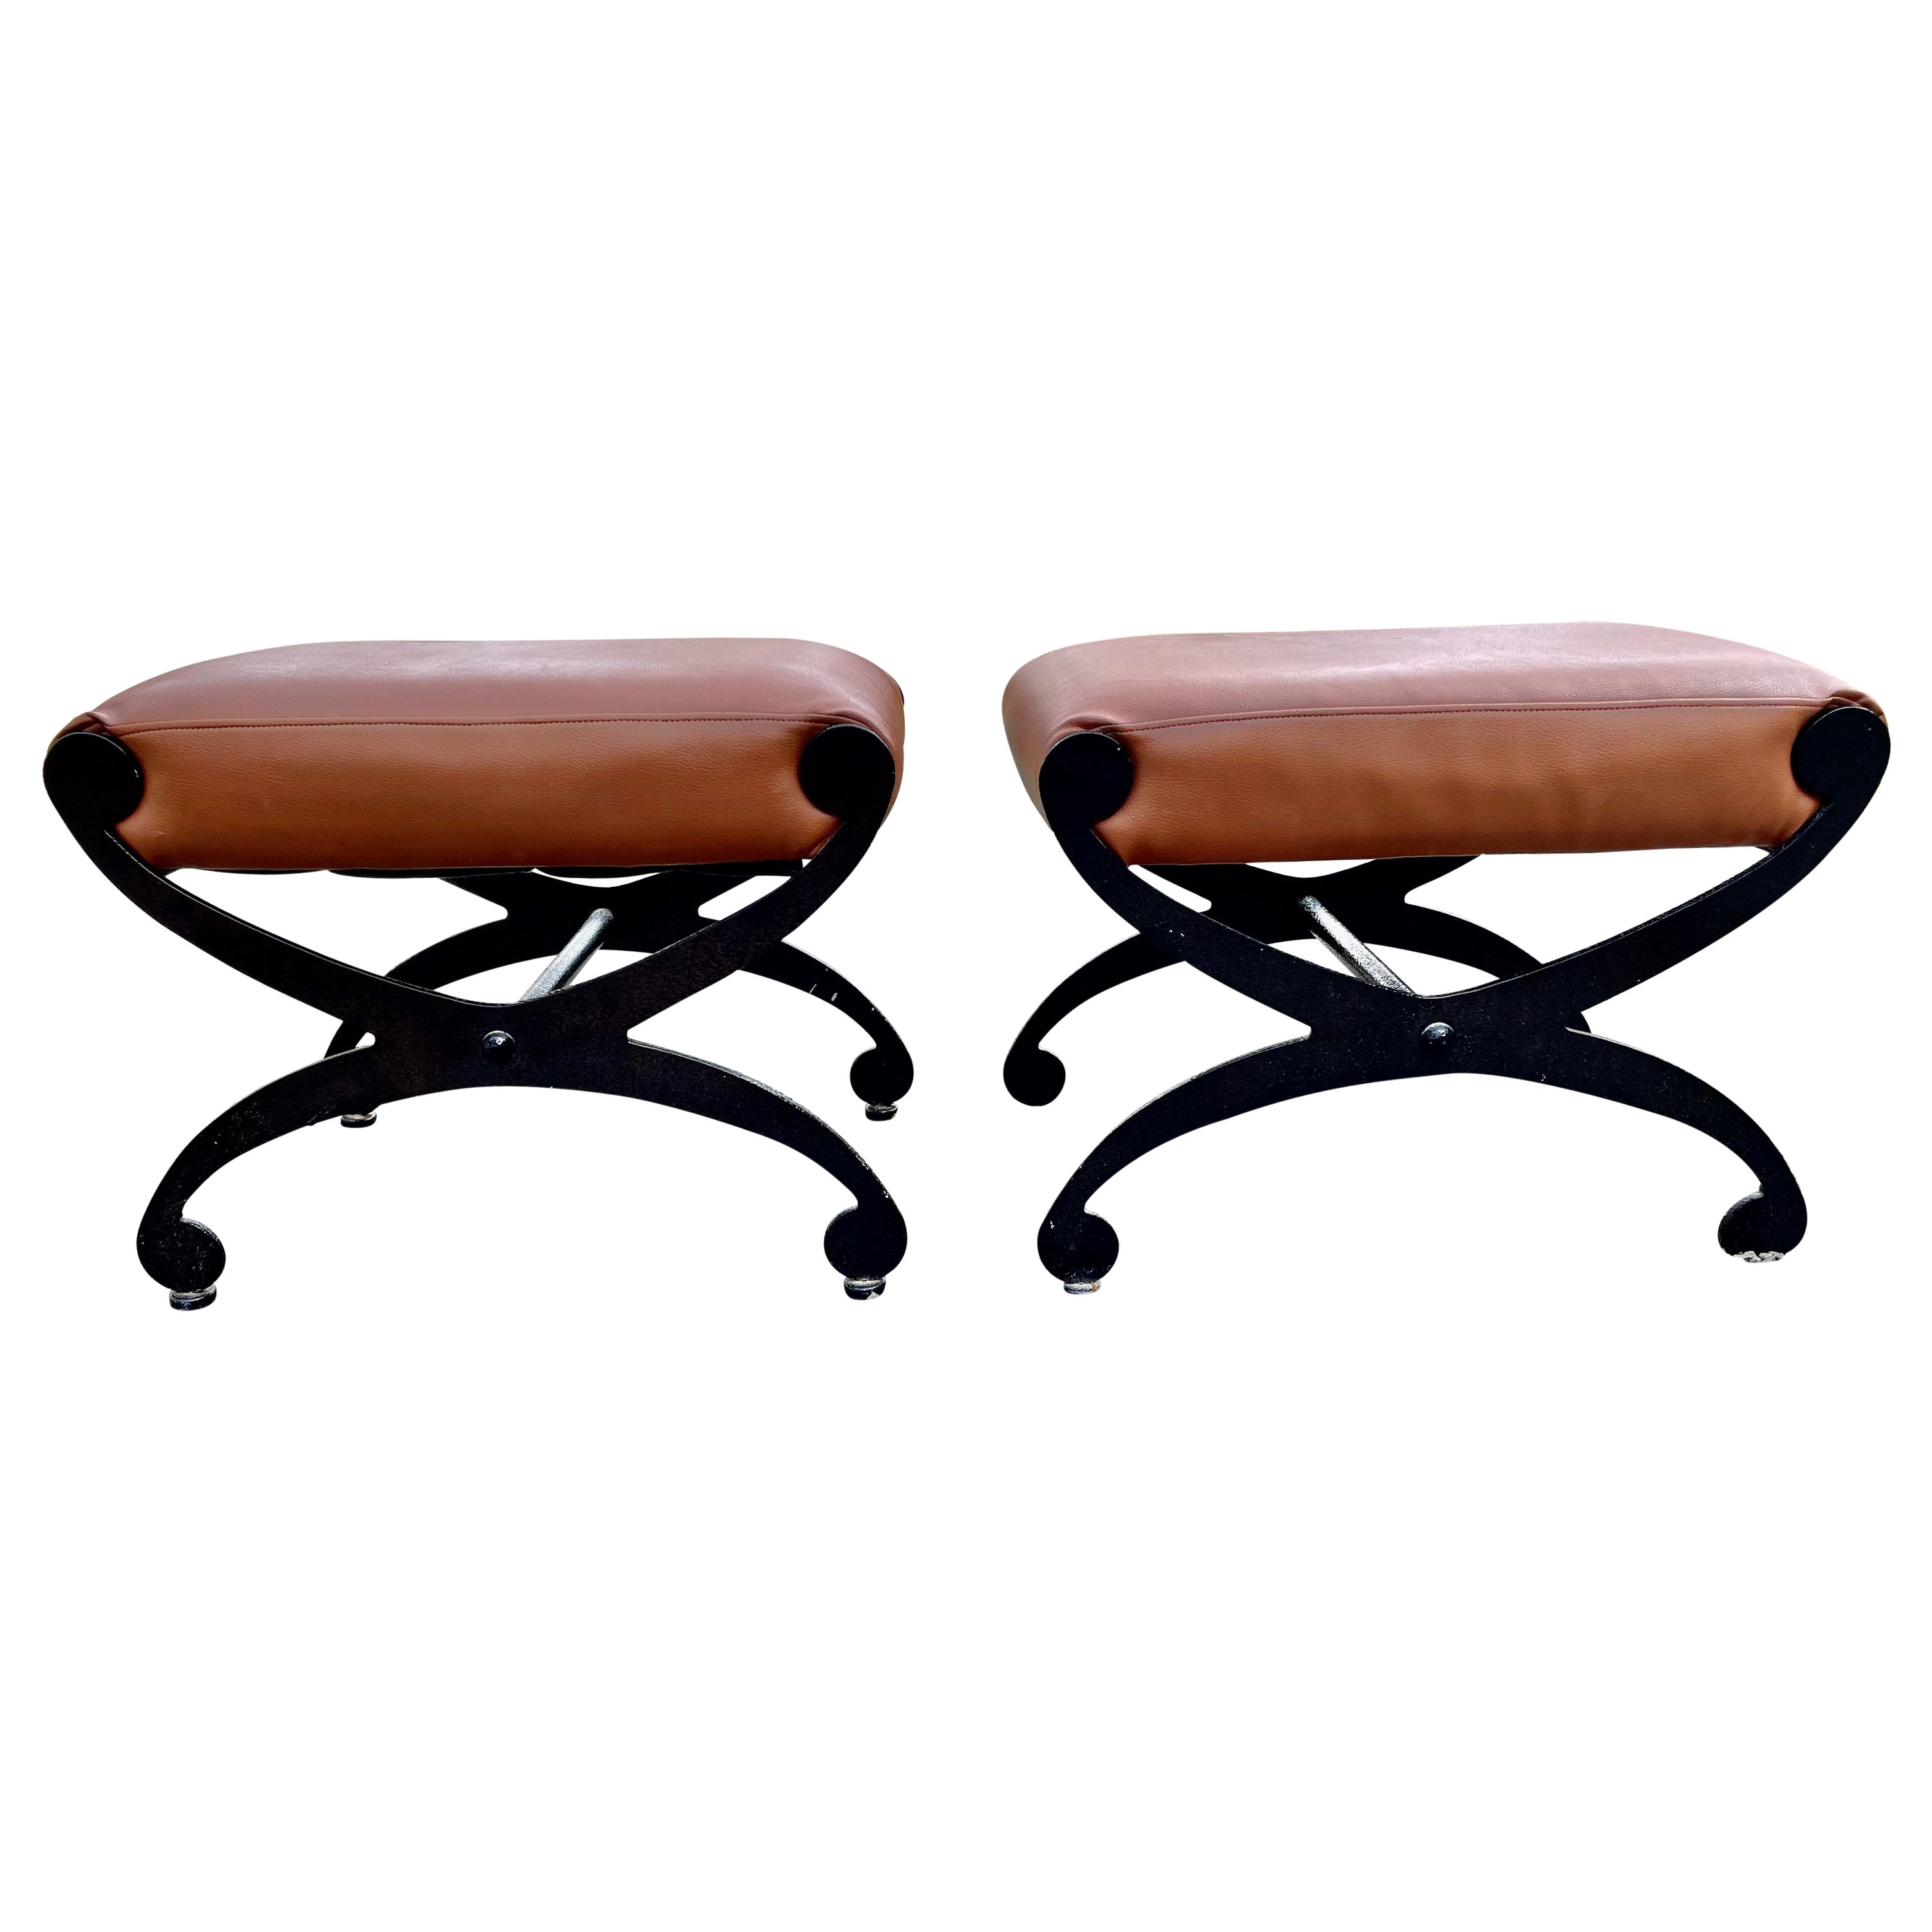 Handsome Pair of Regency Style Wrought Iron & Leather Benches